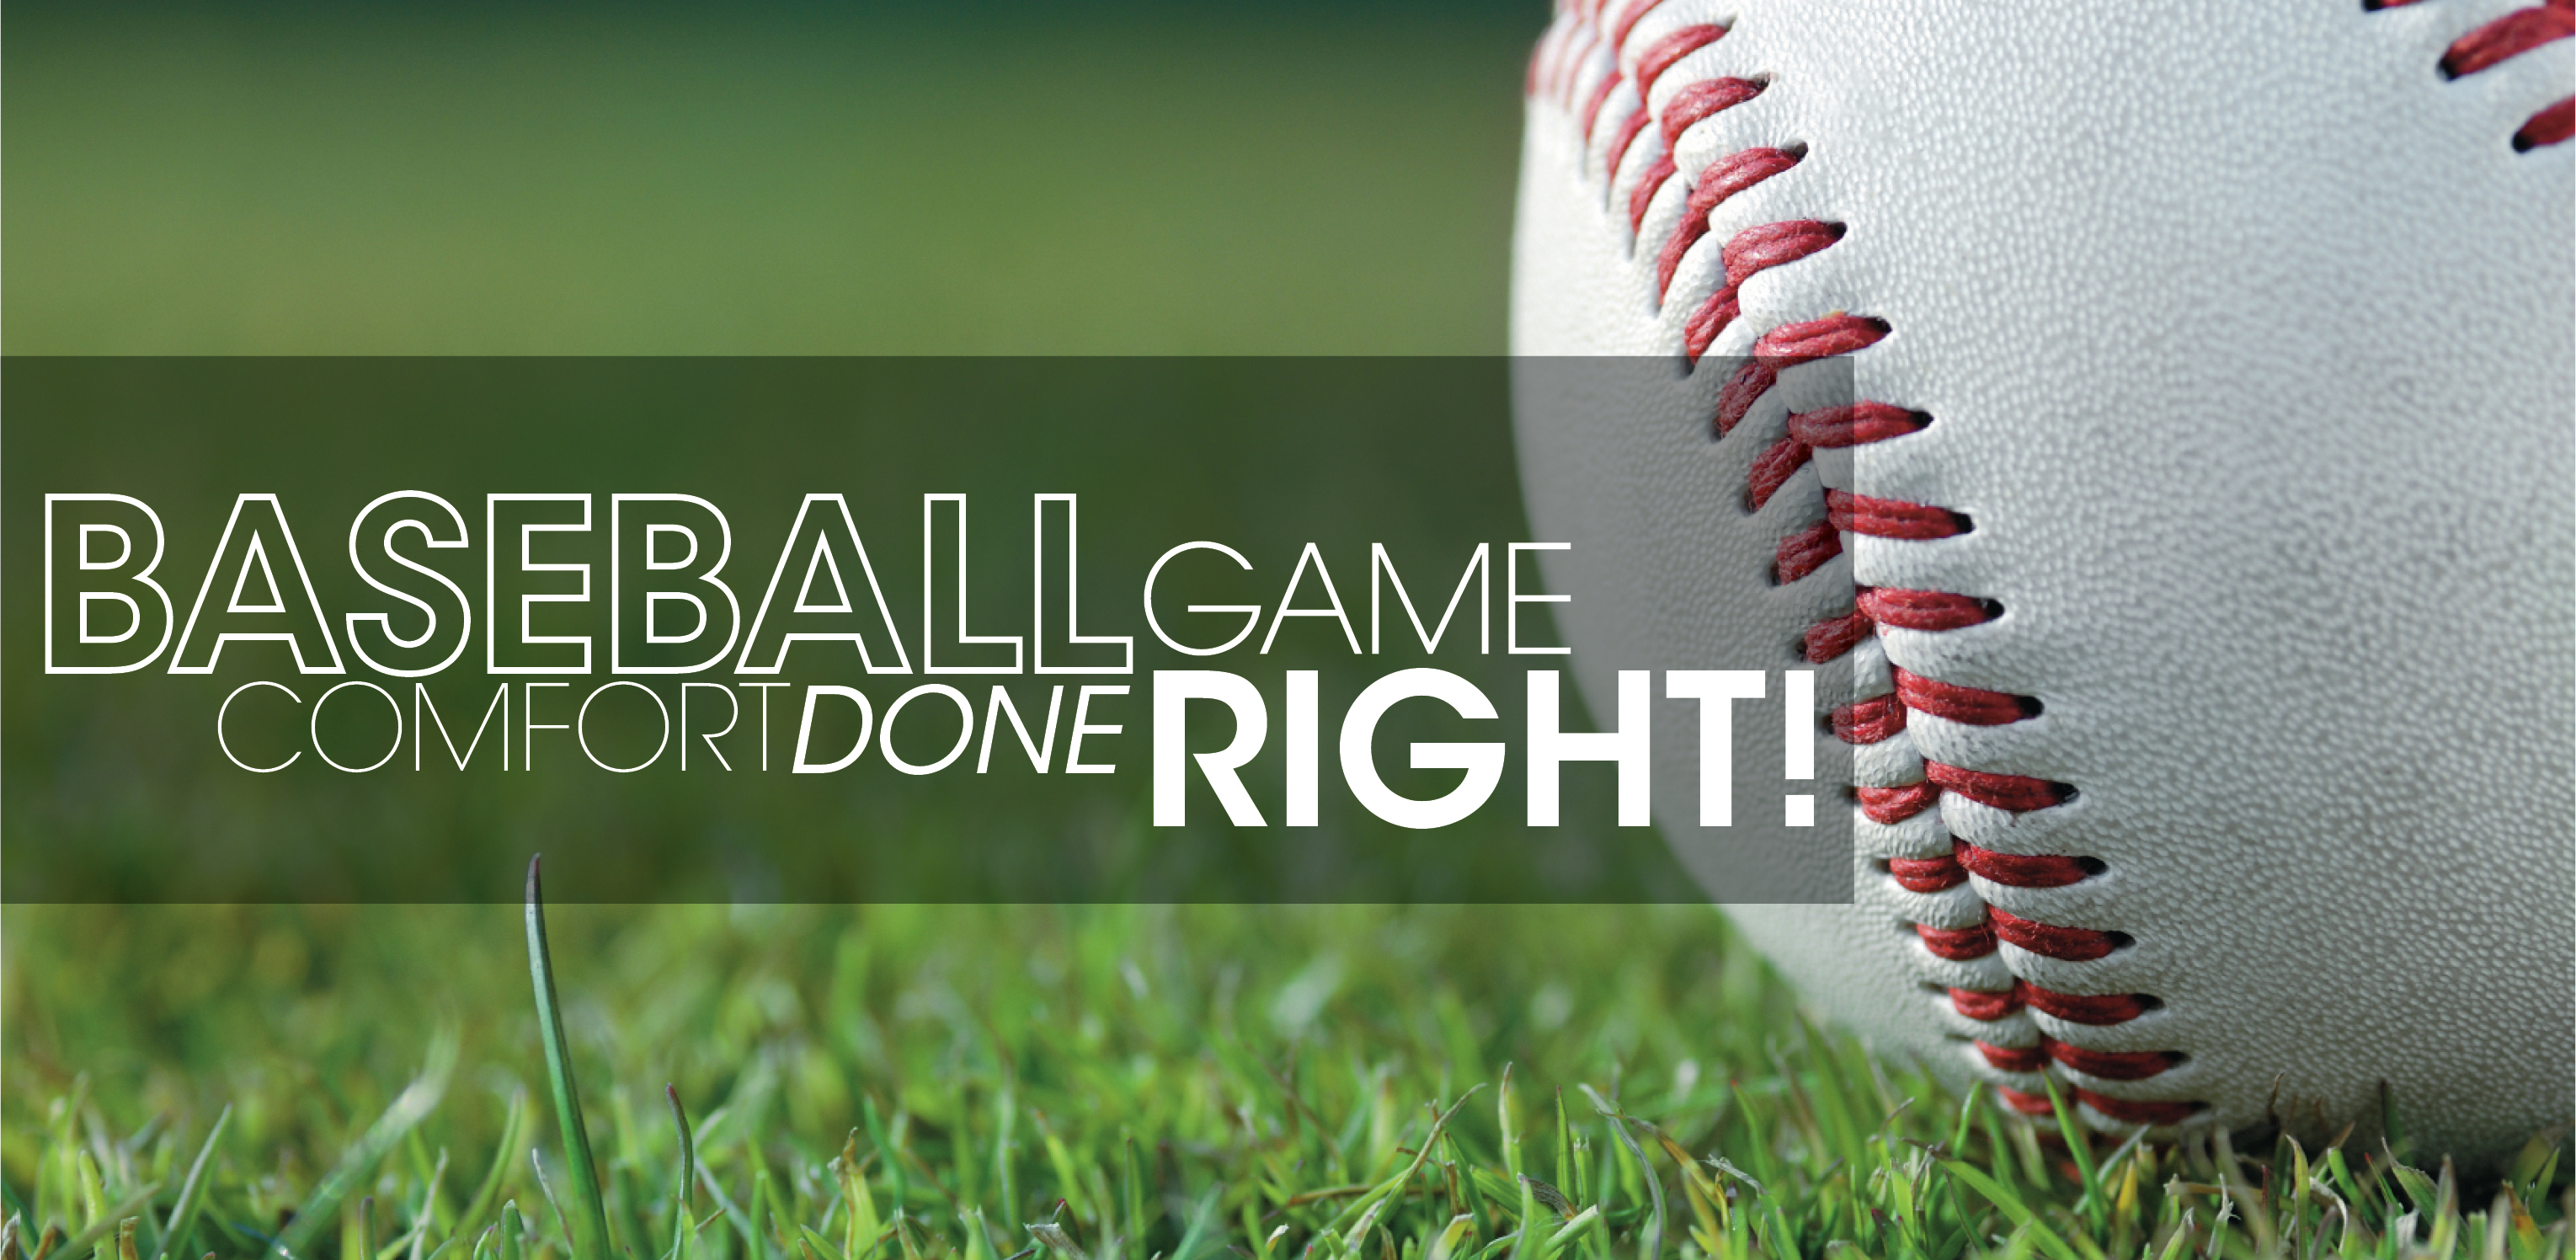 Baseball in grass with text: "baseball game comfort done right!"